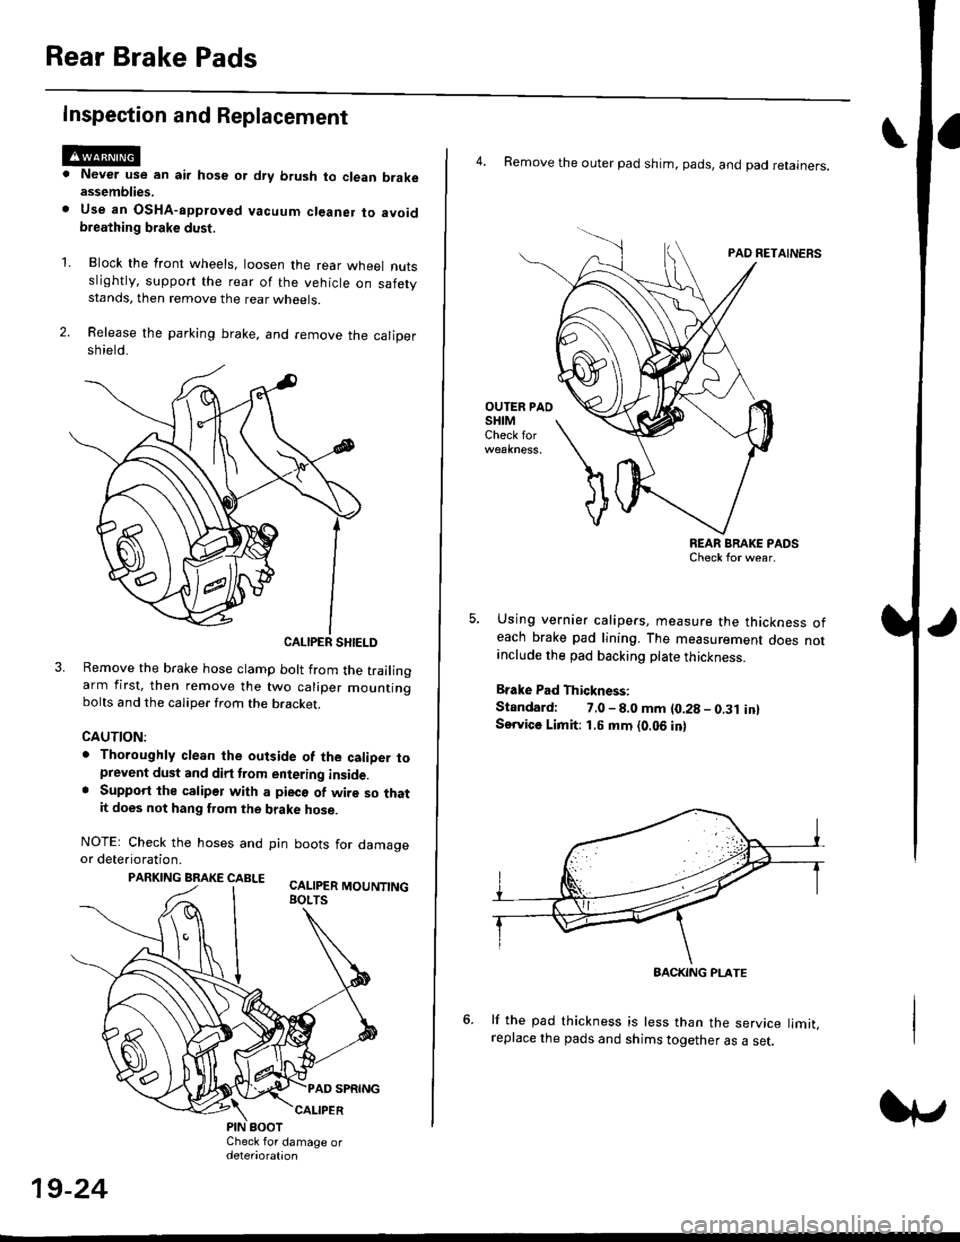 HONDA CIVIC 1996 6.G Workshop Manual Rear Brake Pads
Inspection and Replacement
Never use an air hose or dry brush to clean brakeassemblies.
Use an OsHA-apptoved vacuum cl€aner to avoidbreathing brake dust,
Block the front wheels, loos